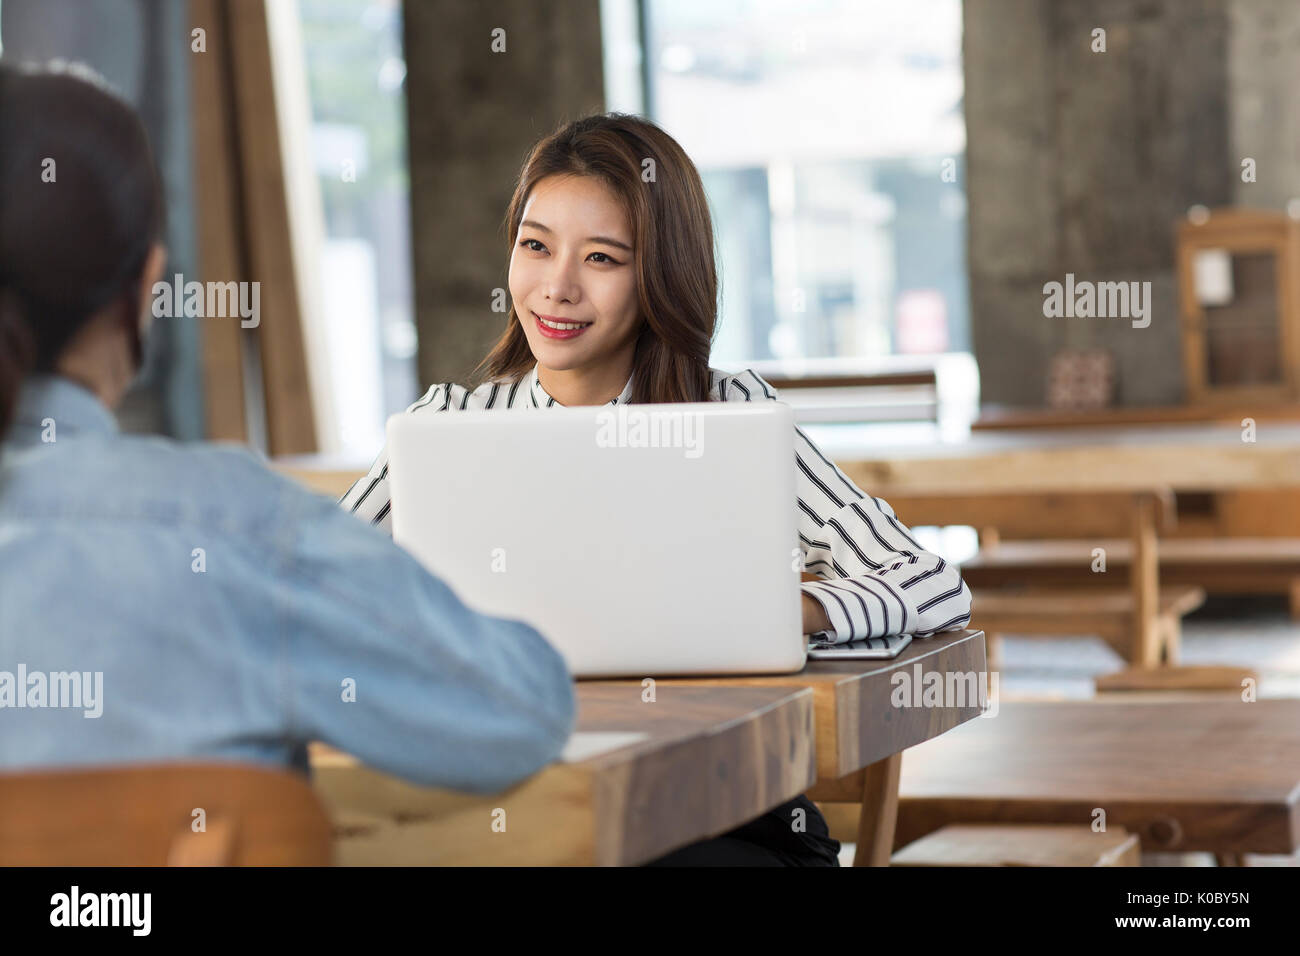 Portrait of young smiling businesswoman dealing with customer at furniture store Stock Photo